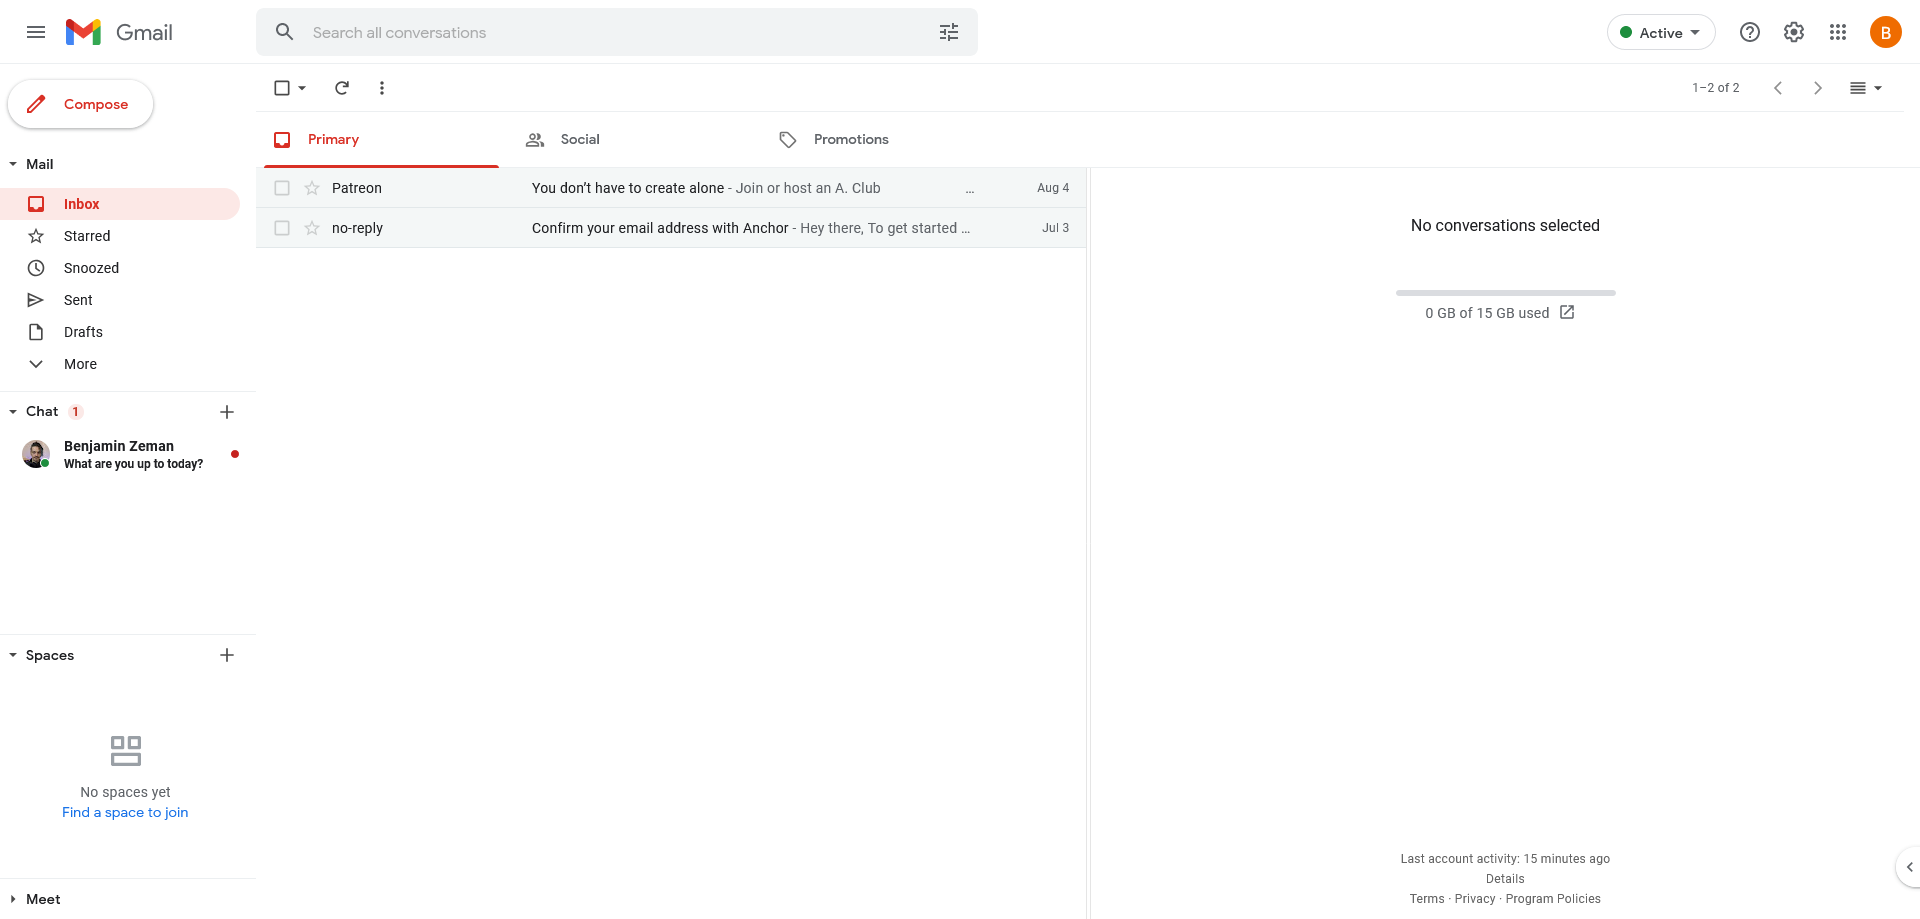 Chat and Meet on in Gmail's old design